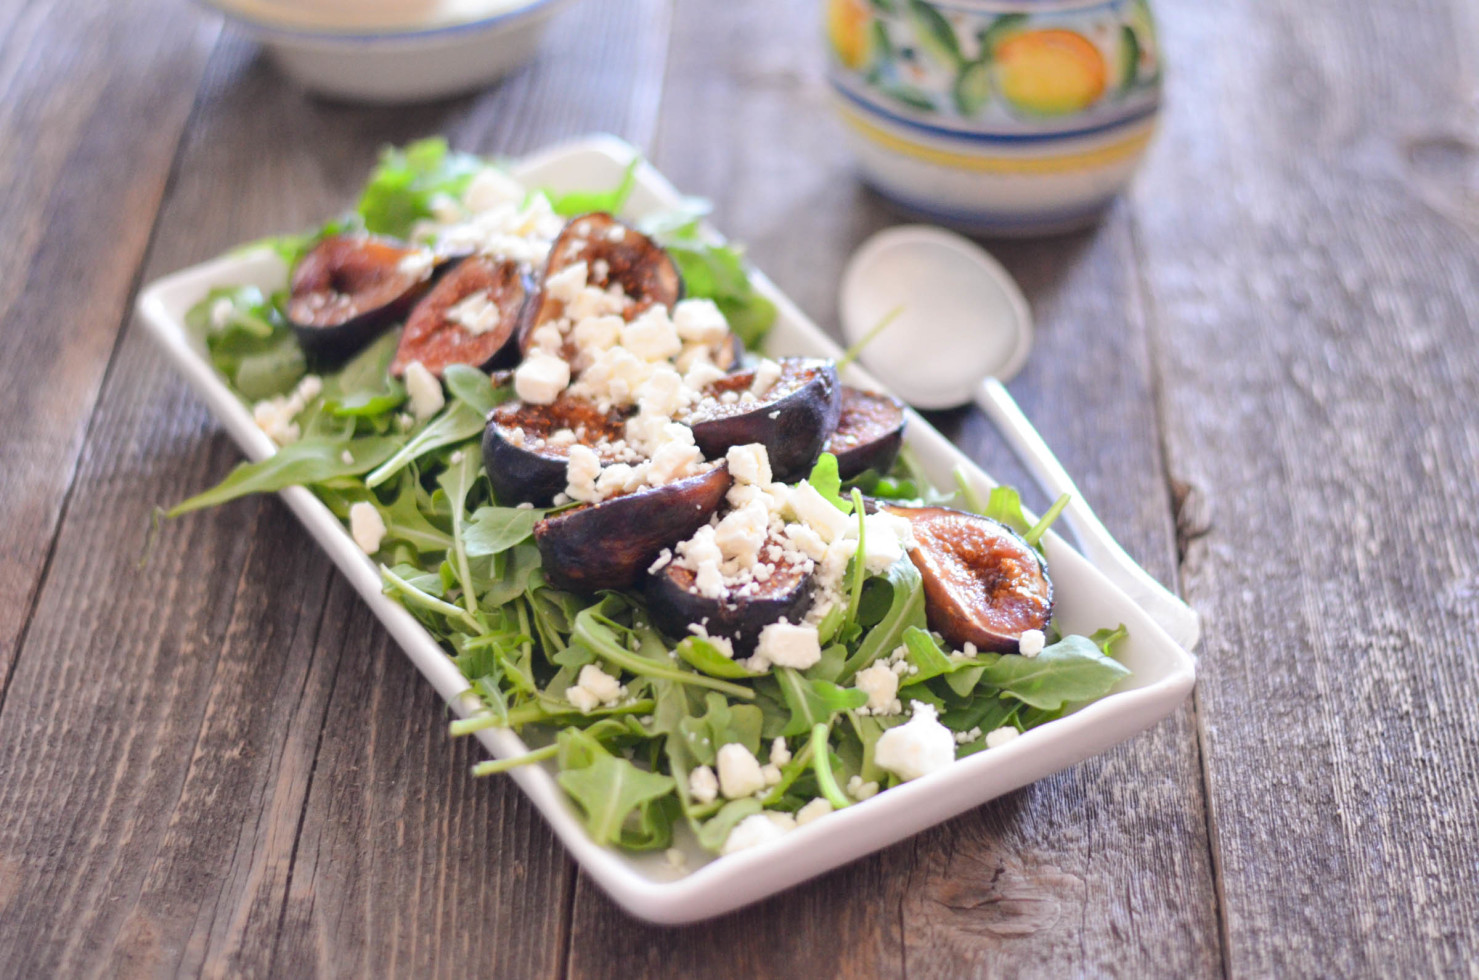 Roasted Fig and Arugula Salad with Crumbled Goat Cheese